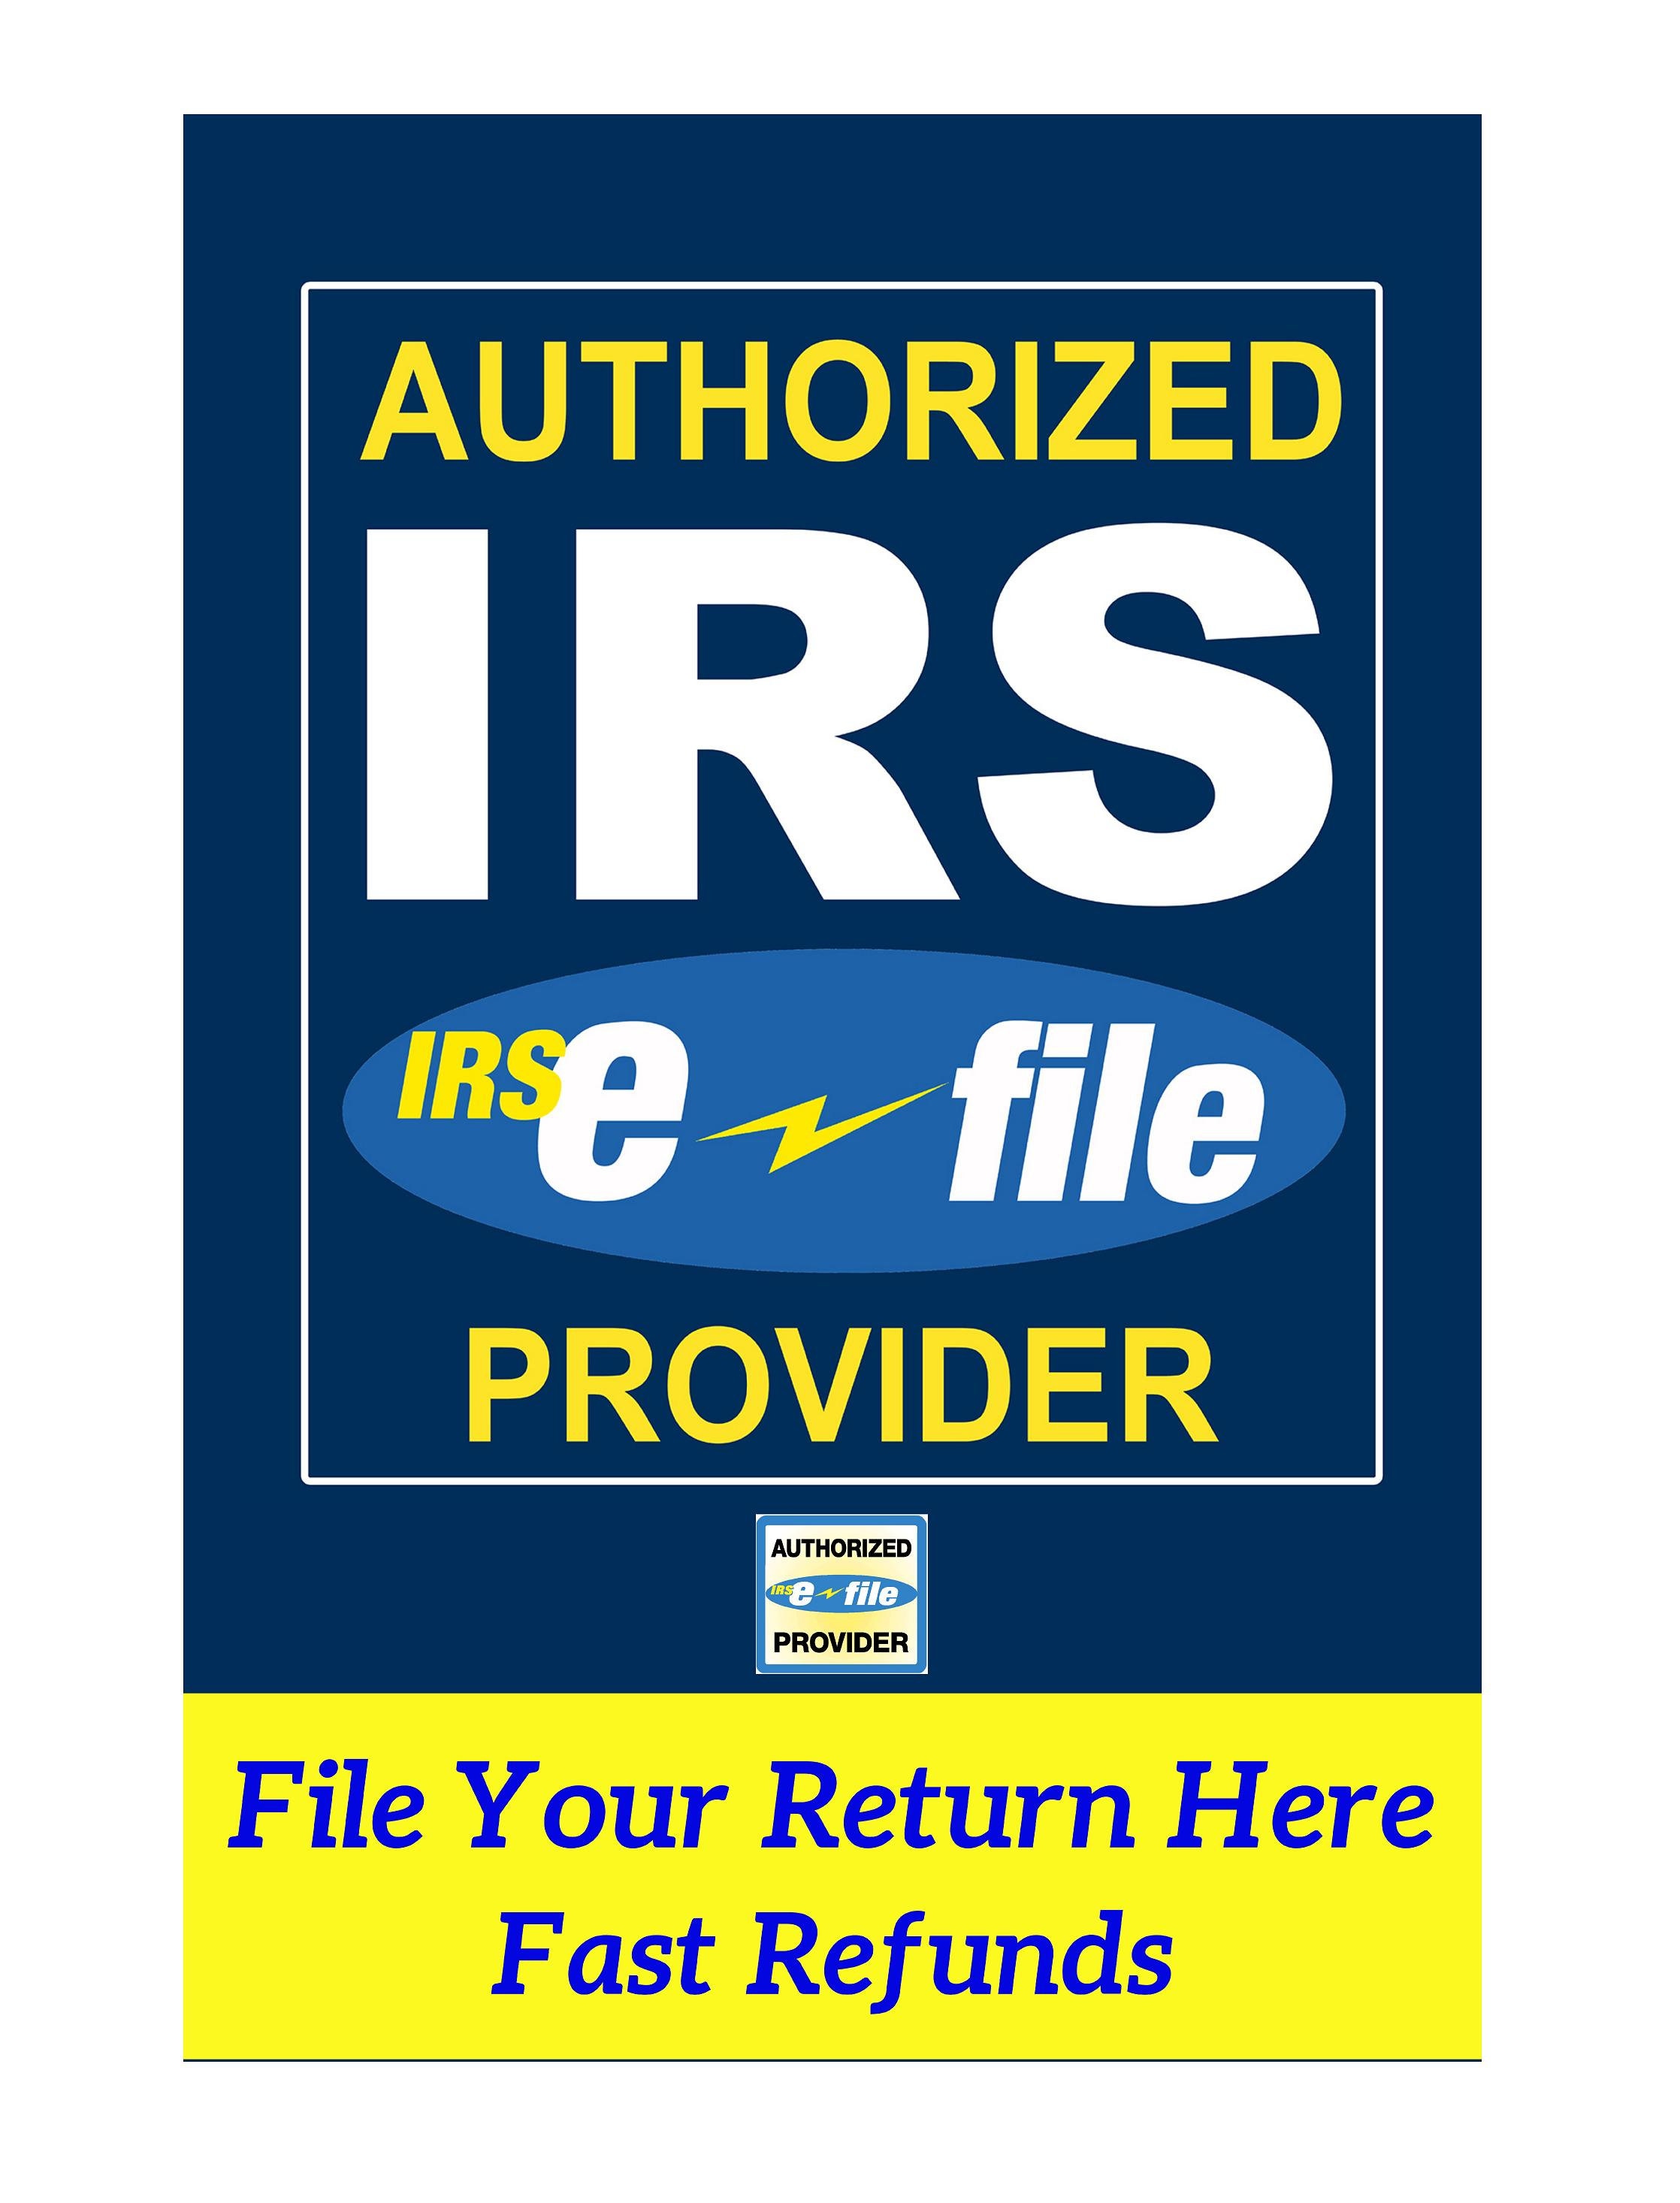 Authorized IRS Efile Provider Advertising Poster Sign Etsy